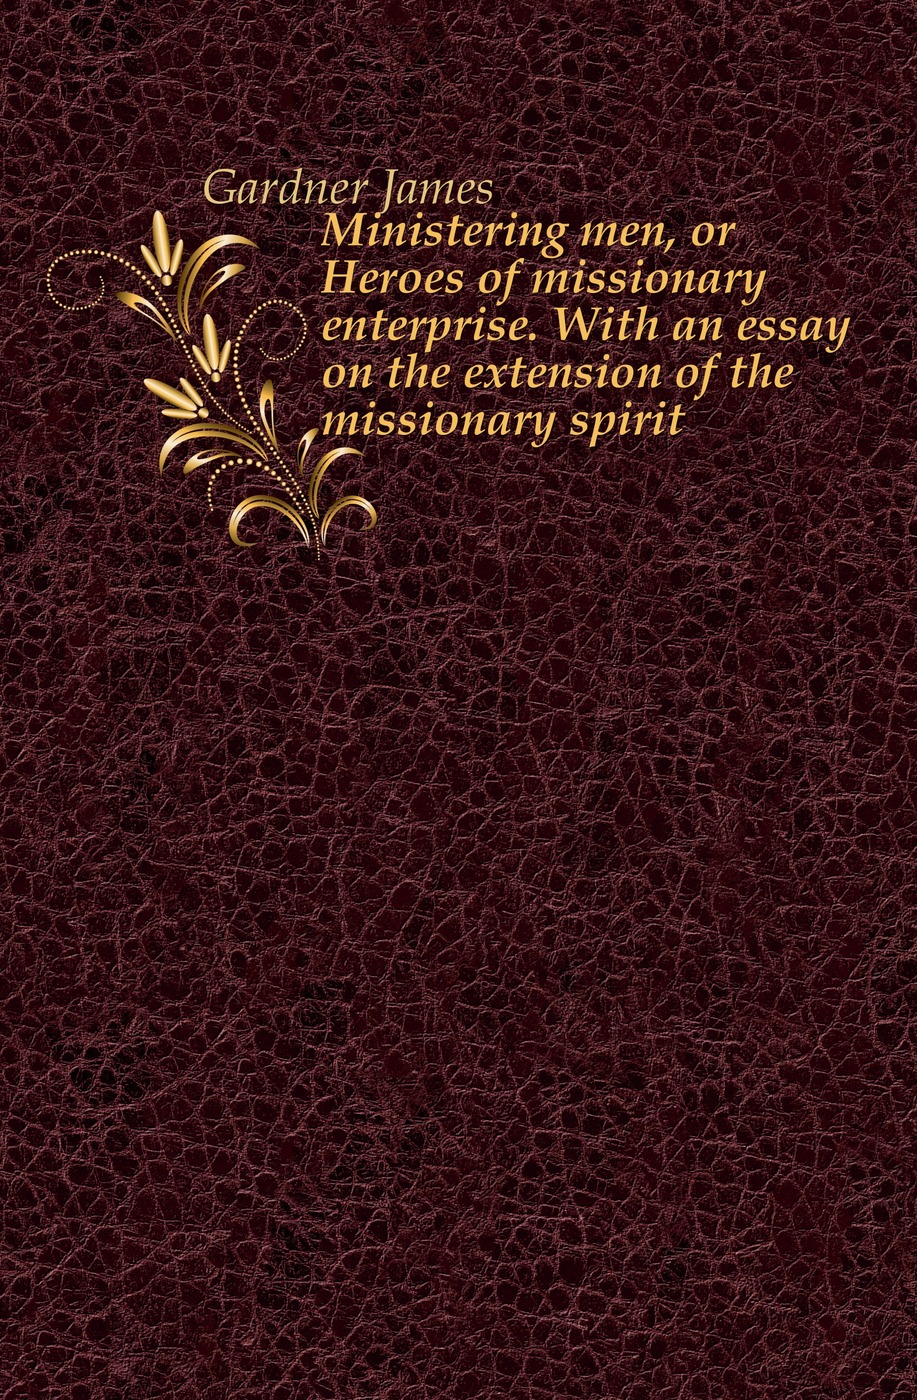 Ministering men, or Heroes of missionary enterprise. With an essay on the extension of the missionary spirit